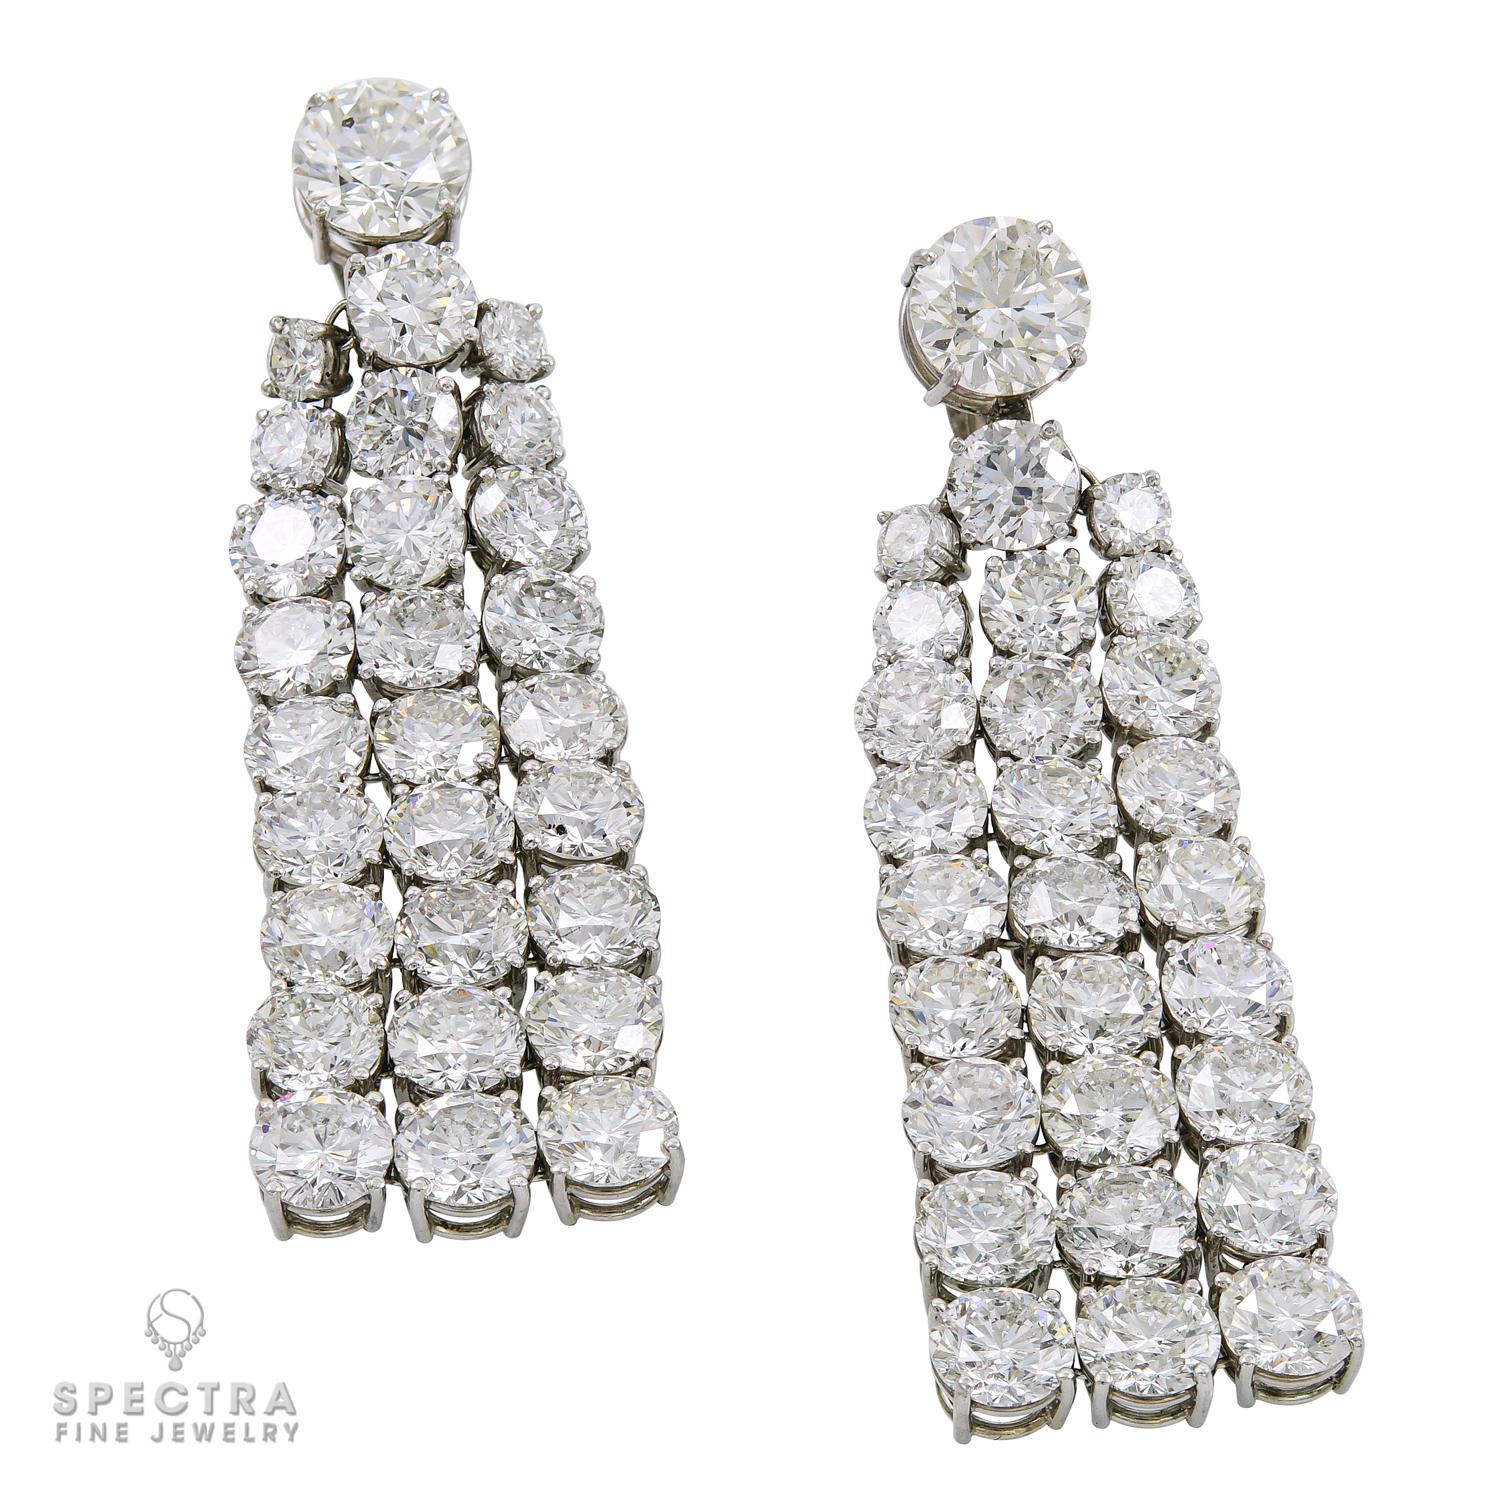 These Diamond Waterfall Drop Earrings made by Spectra Fine Jewelry in the 21st century, circa 2010s, have a classic design with a dramatic effect. Approximating an actual waterfall, the colorful sparkle of the diamonds refracts the light into